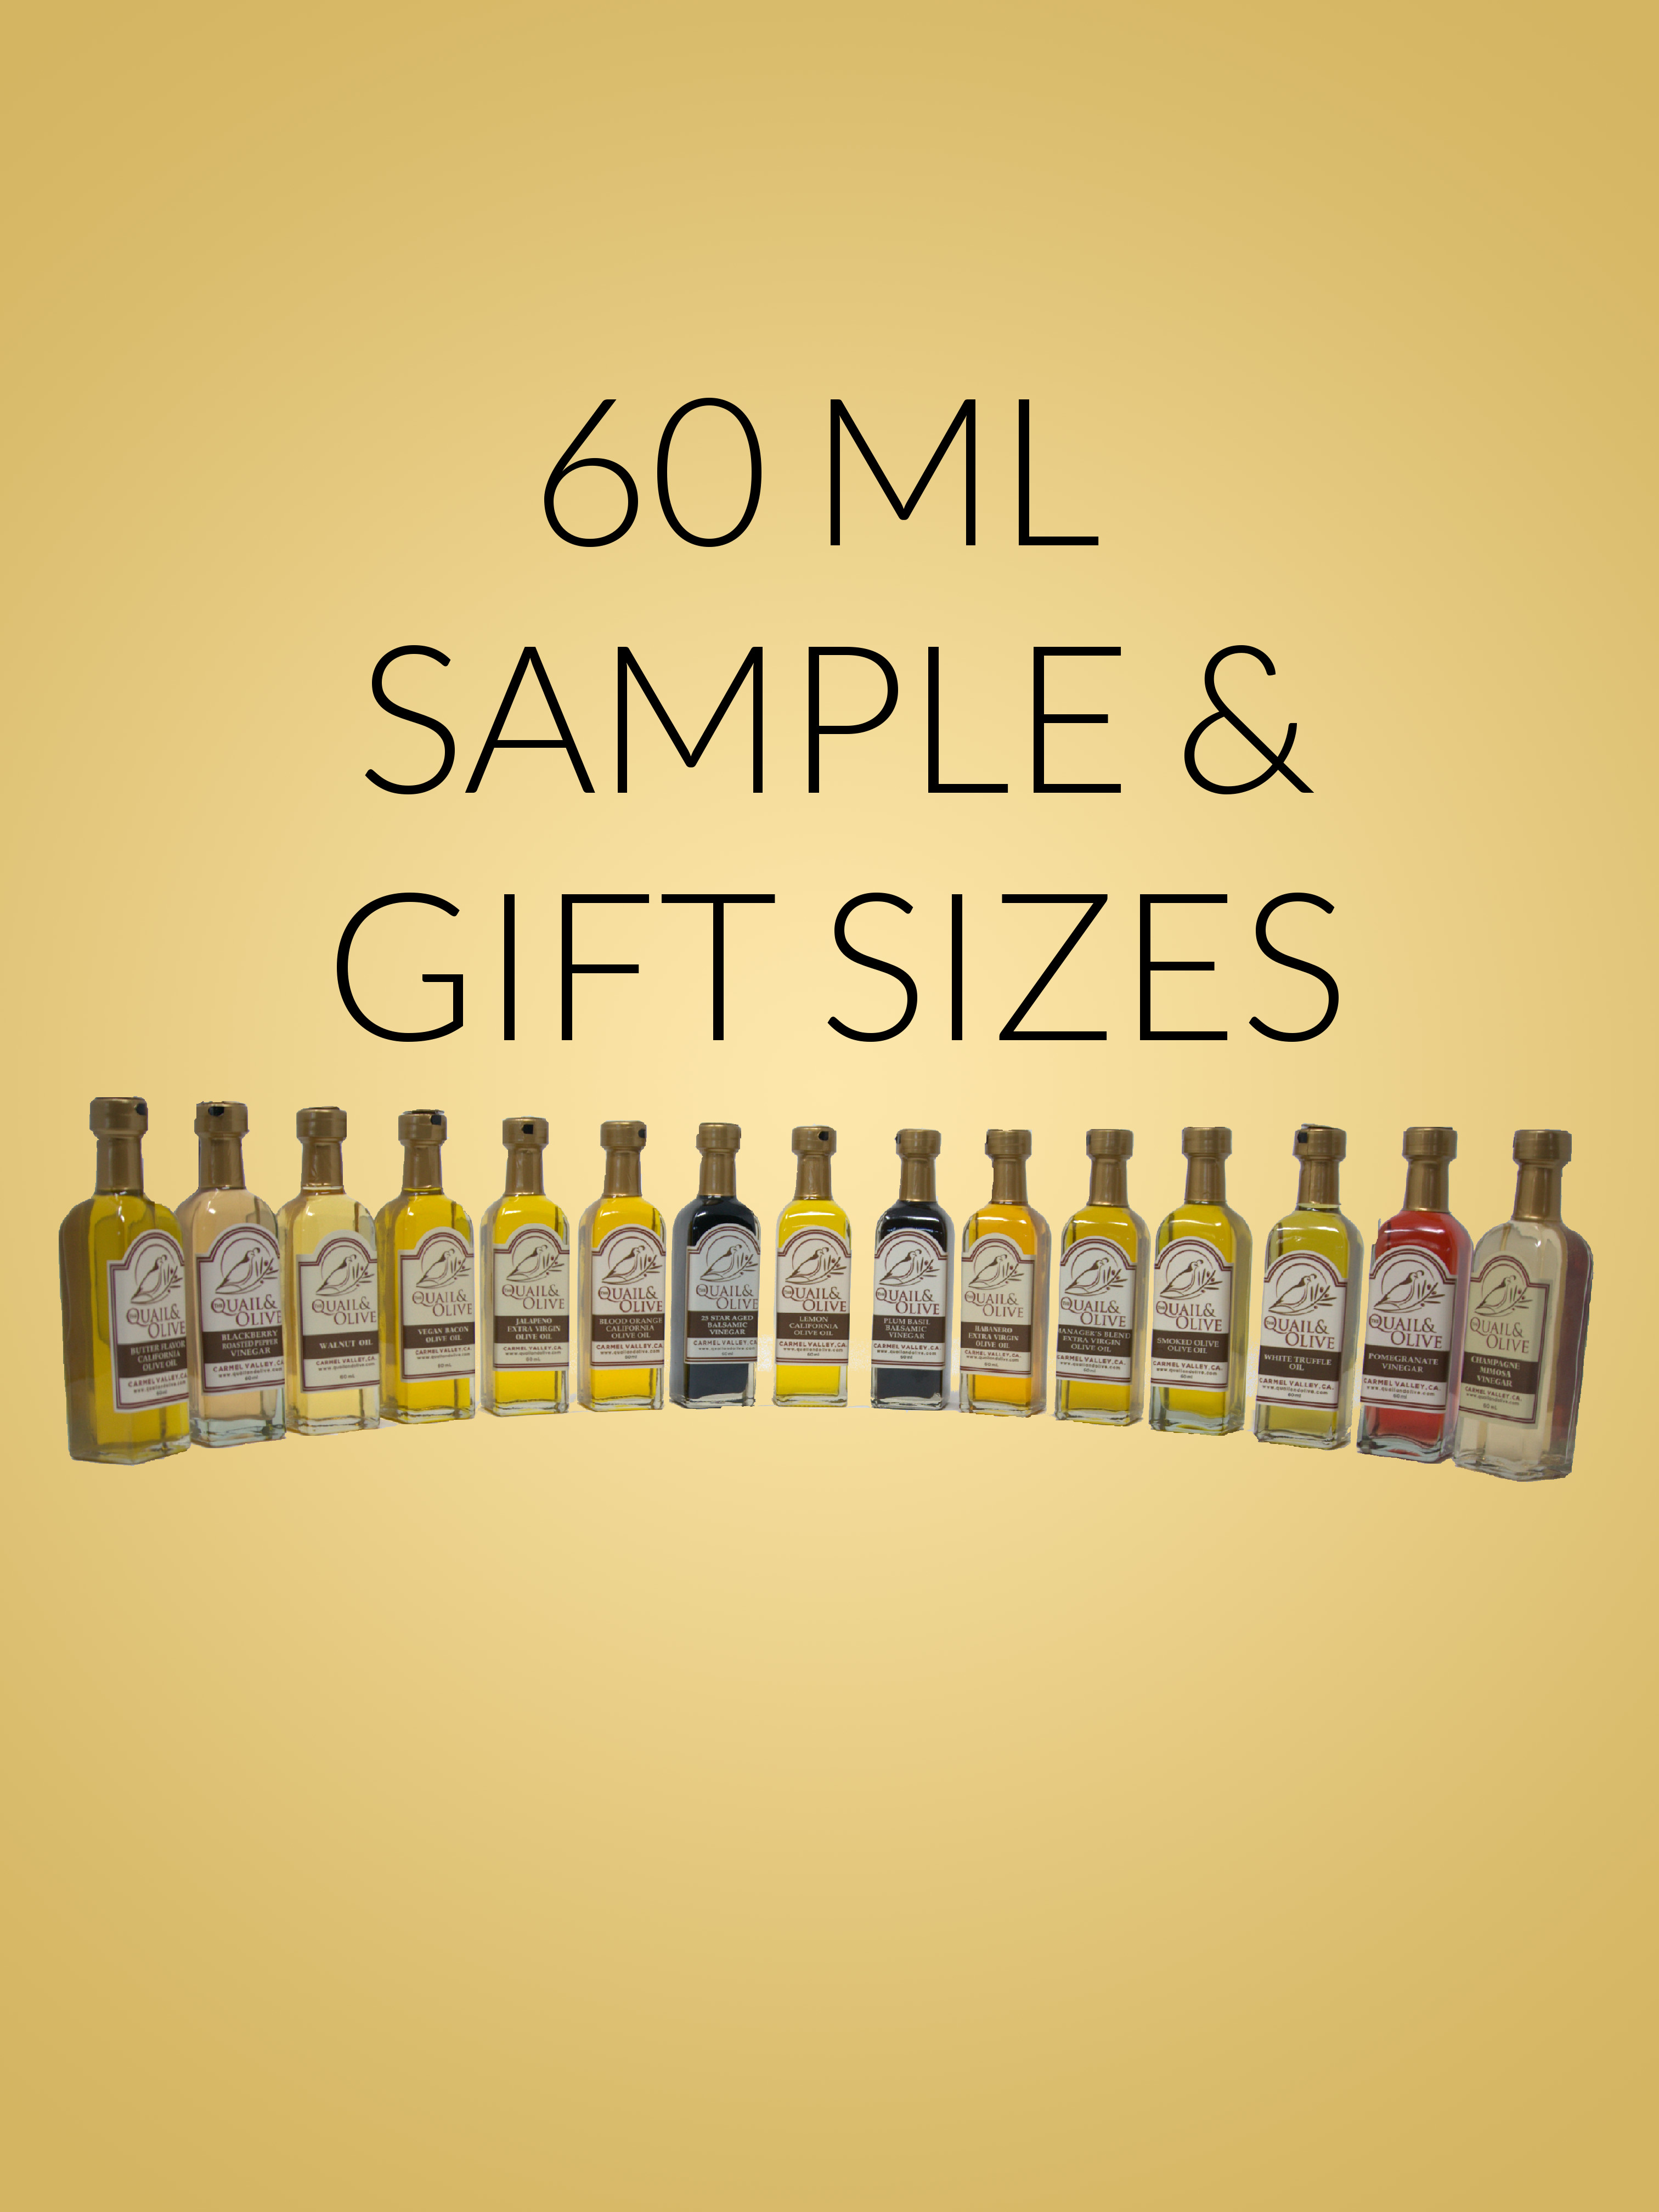 Product Image for Lemon Flavored 60ml